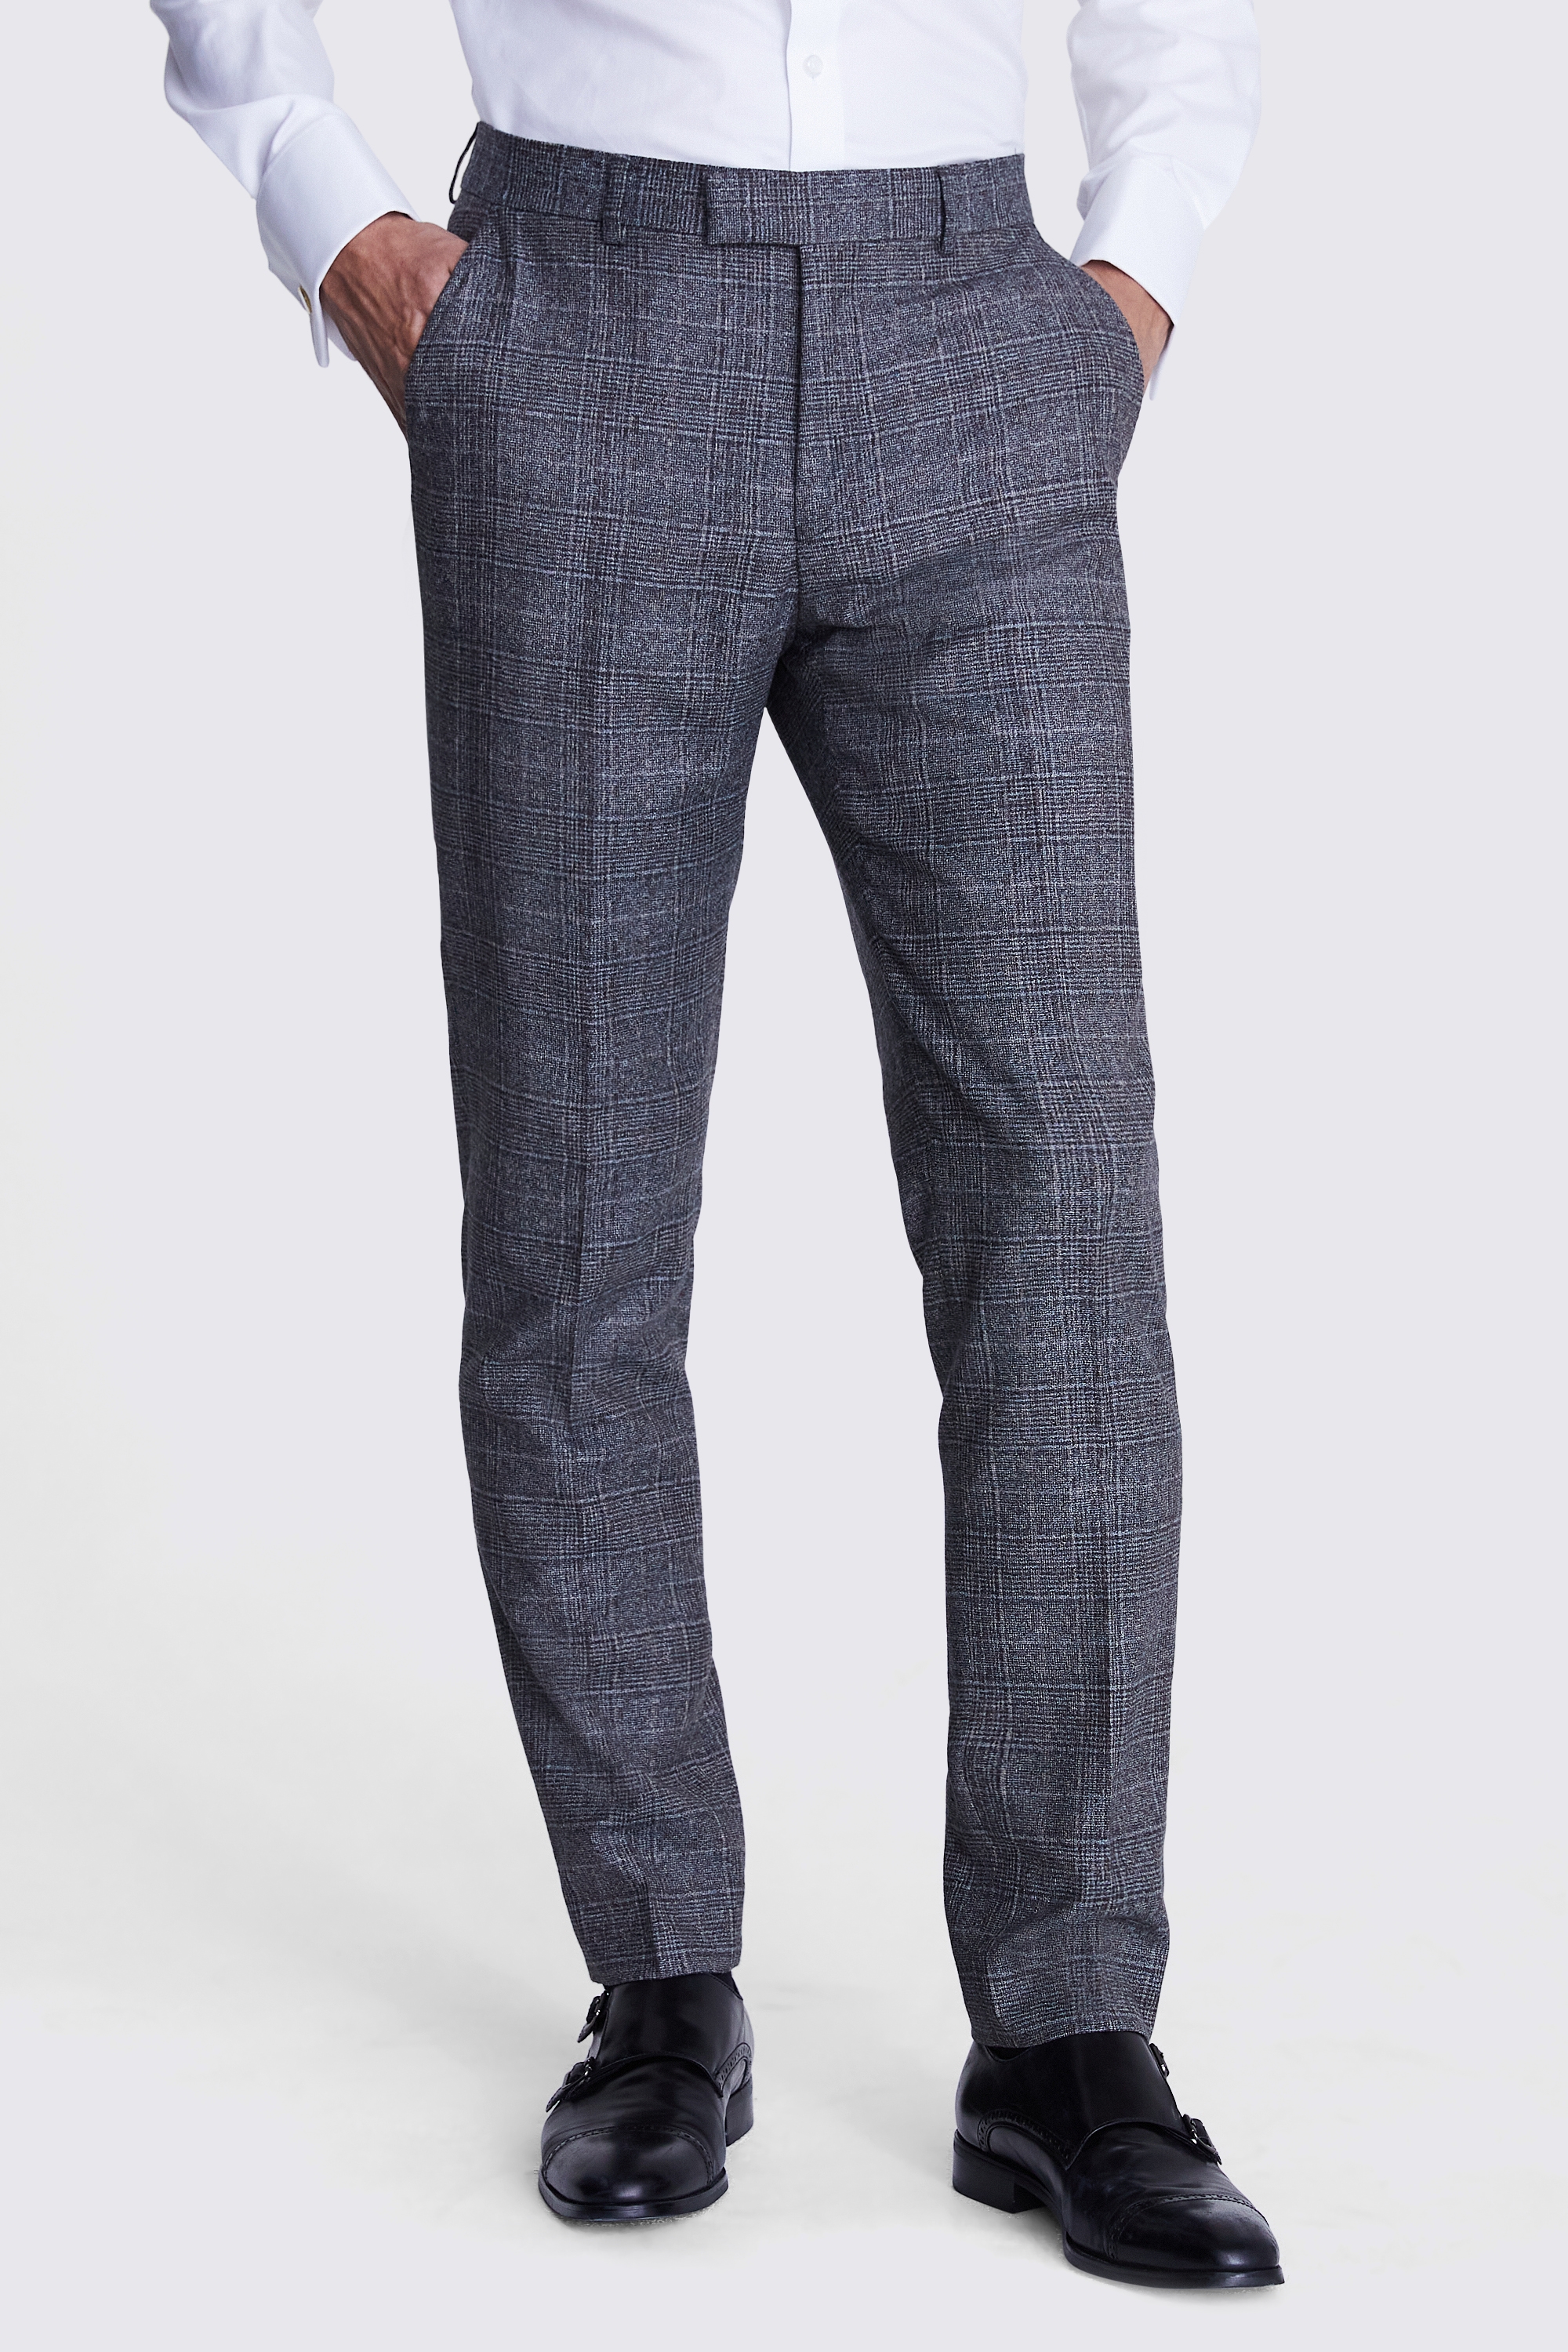 Italian Slim Fit Grey Check Trousers | Buy Online at Moss